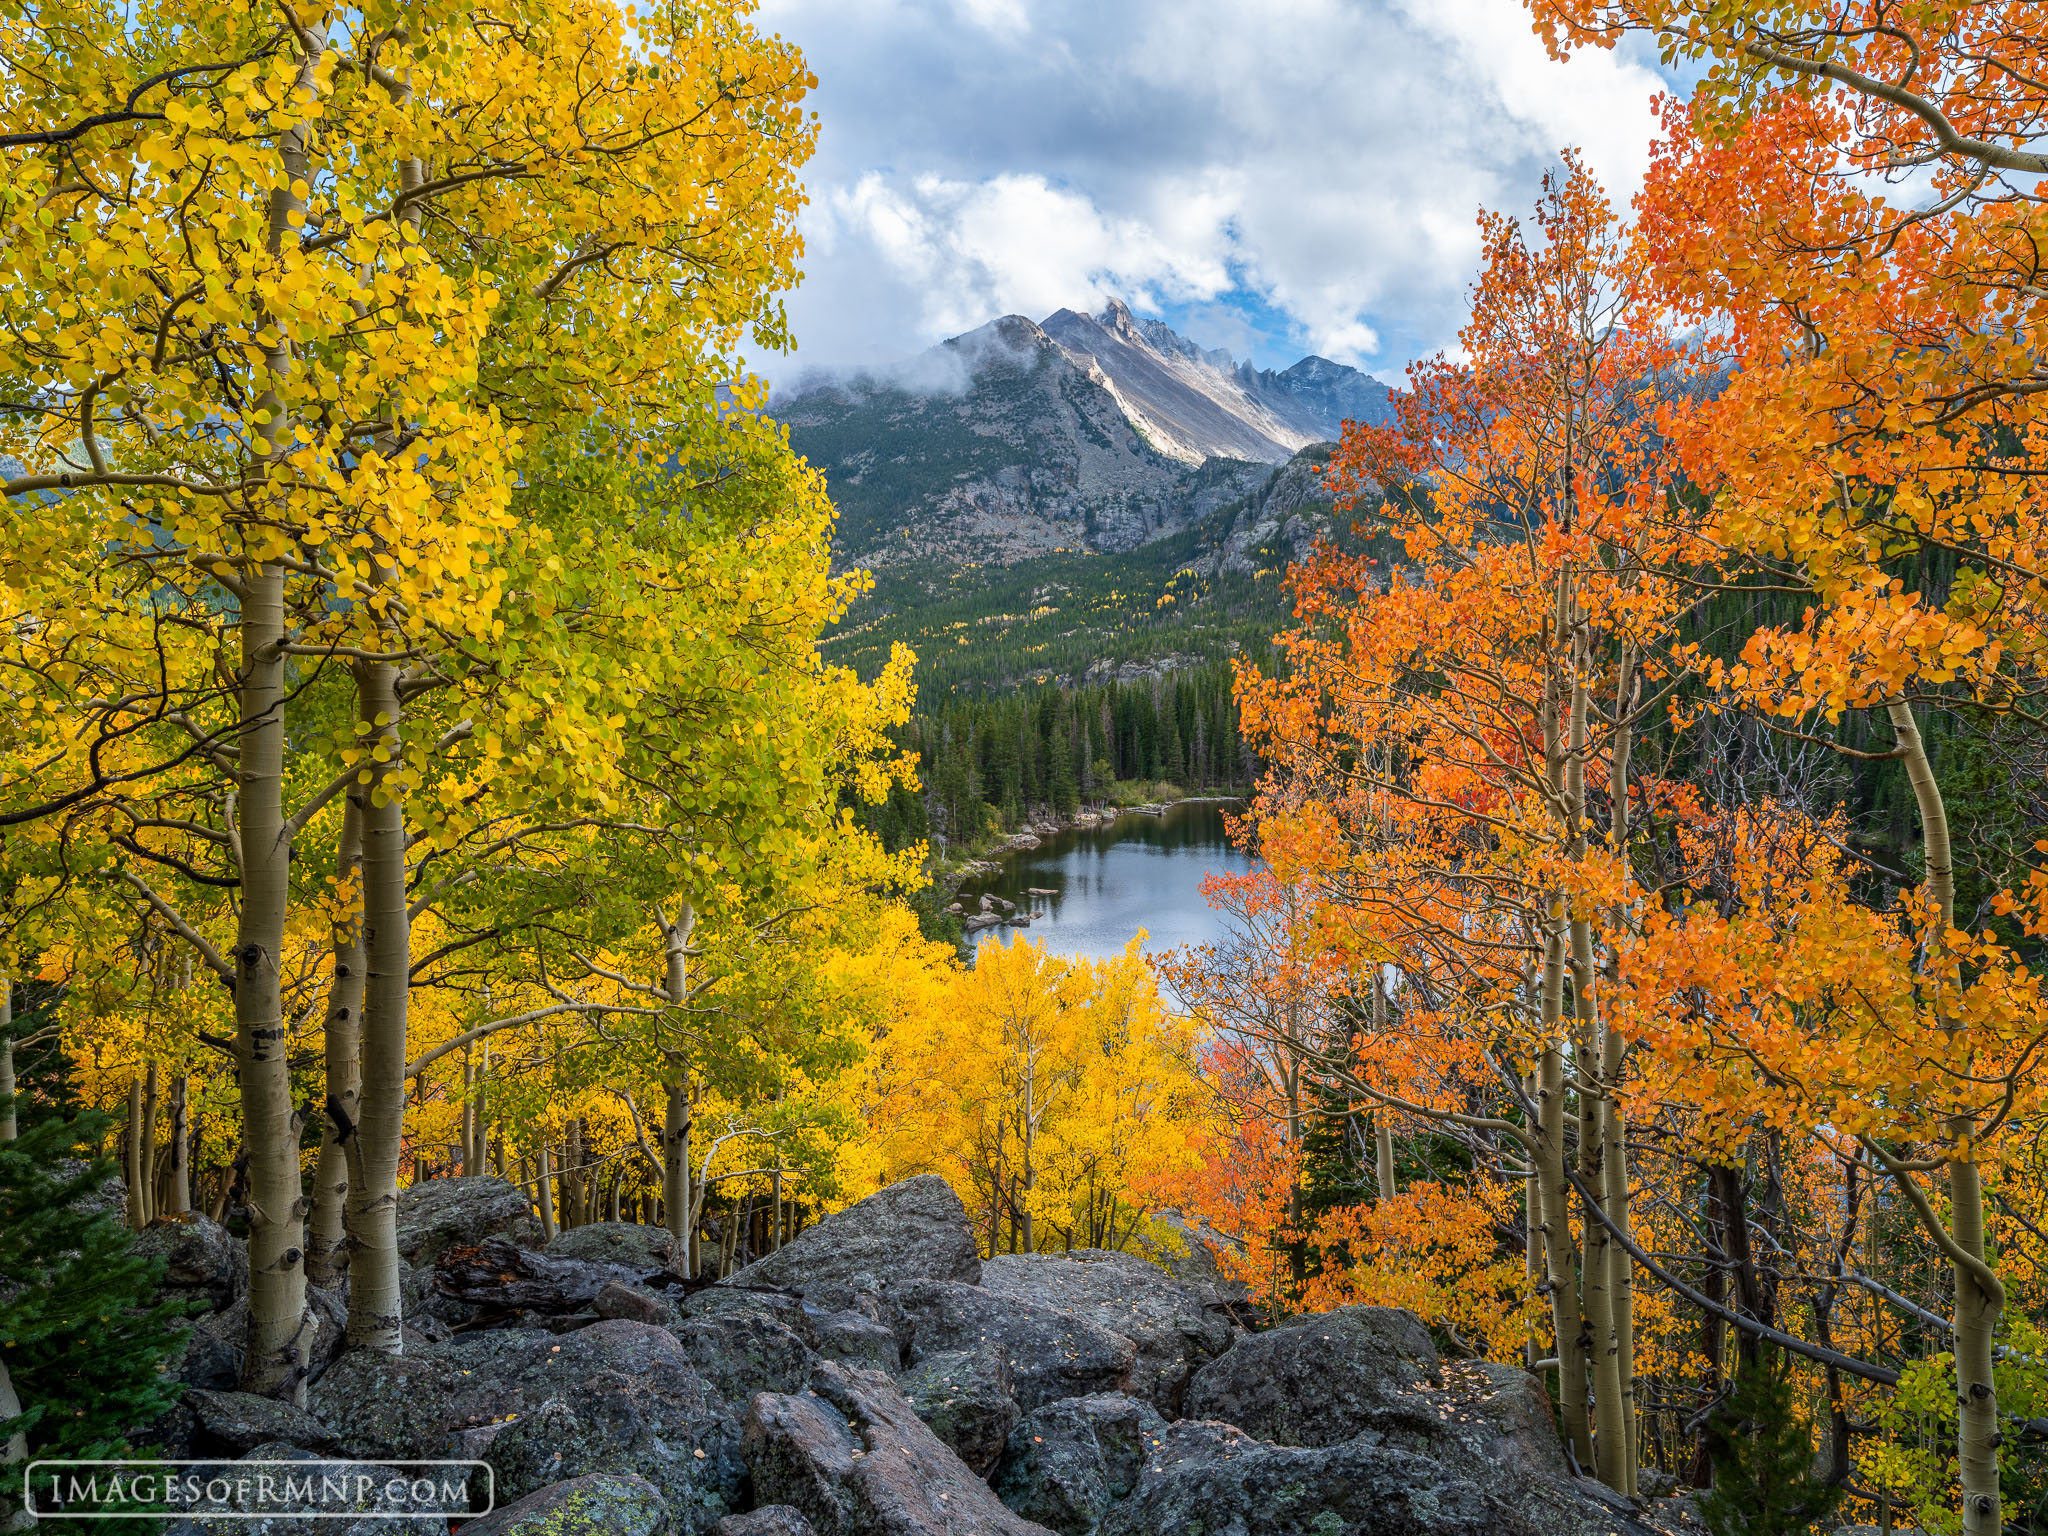 At the end of September each year the aspen grove above Bear Lake dresses in its autumn finery. Half of the aspen dress in bright...